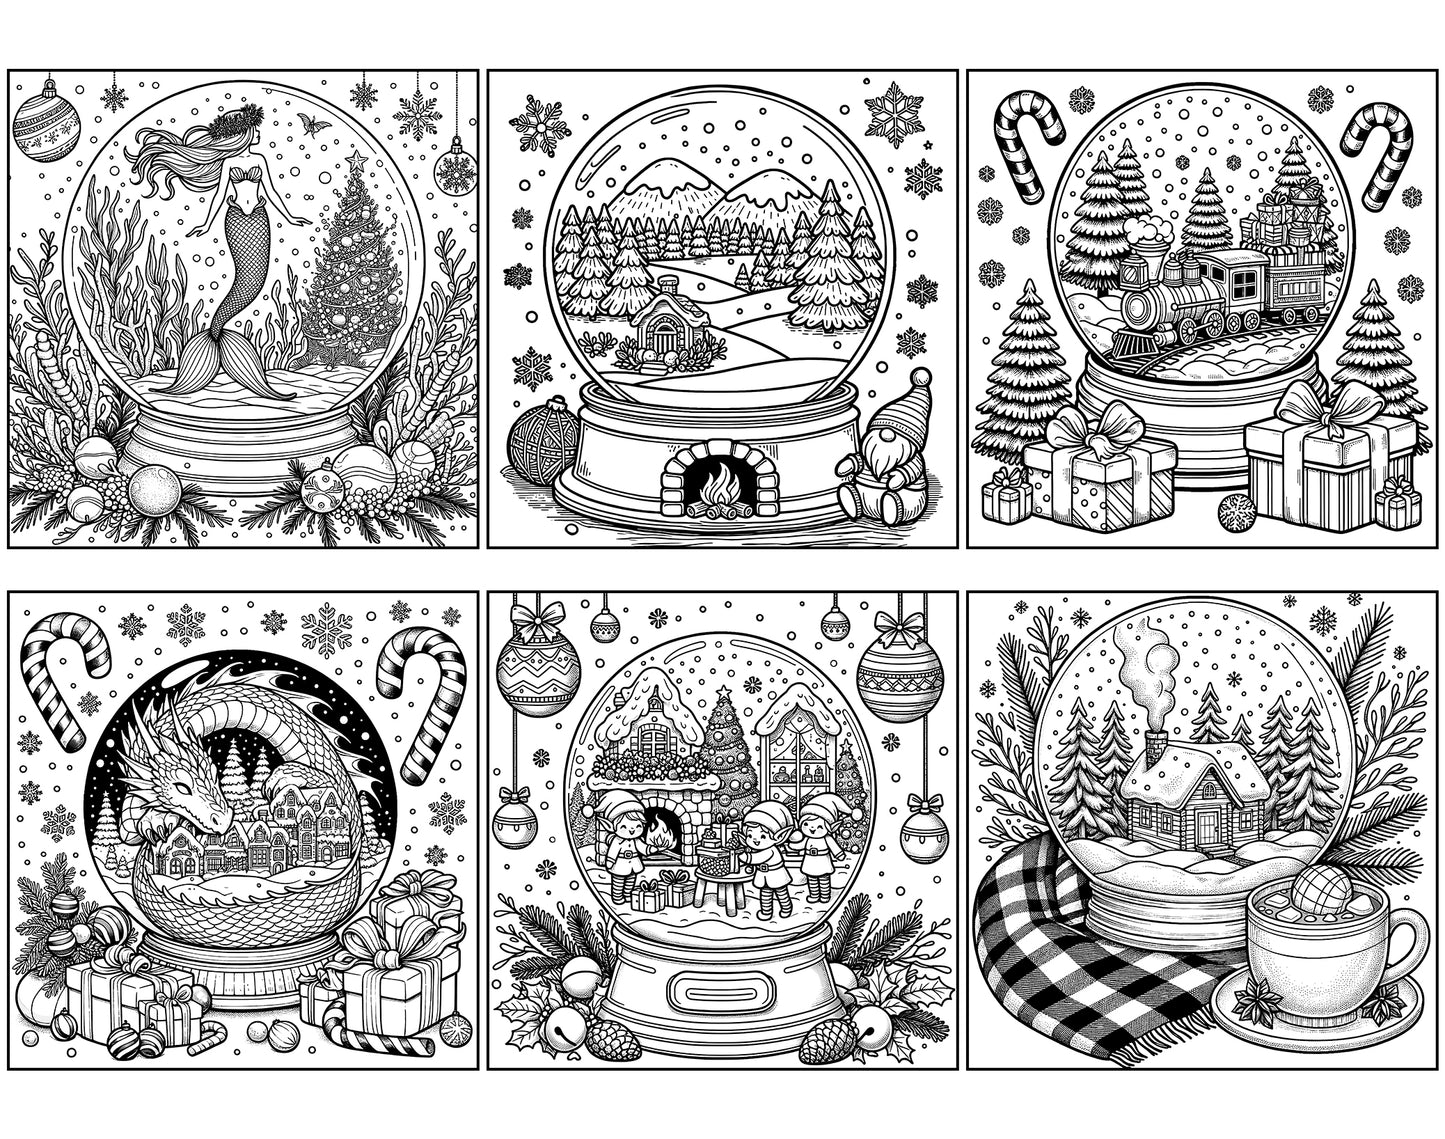 101 Snow Globe Christmas Coloring Pages - Instant Download - Printable